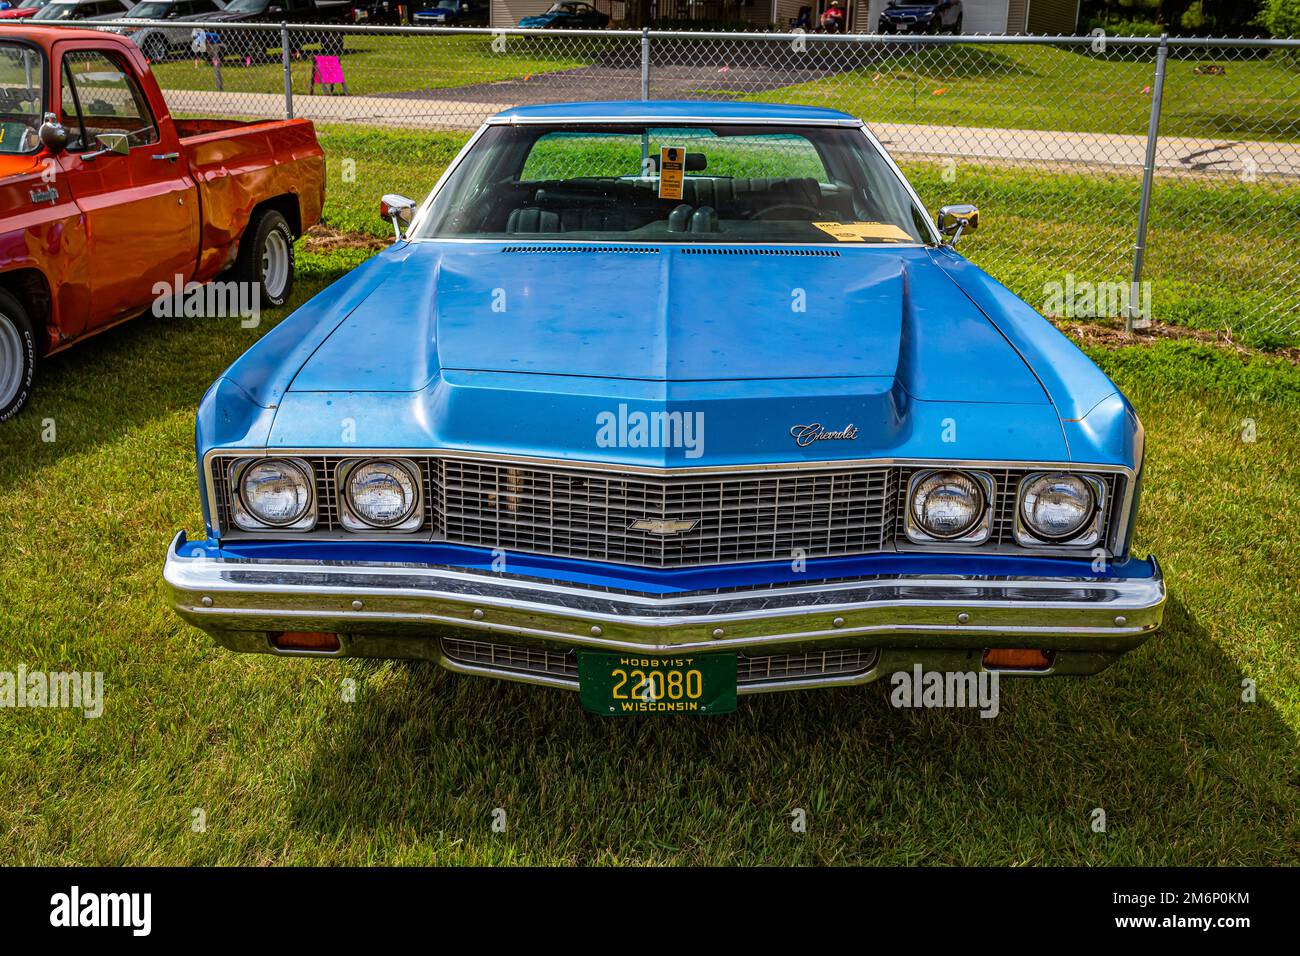 Iola, WI - July 07, 2022: High perspective front view of a 1973 Chevrolet Impala 2 Door Hardtop at a local car show. Stock Photo